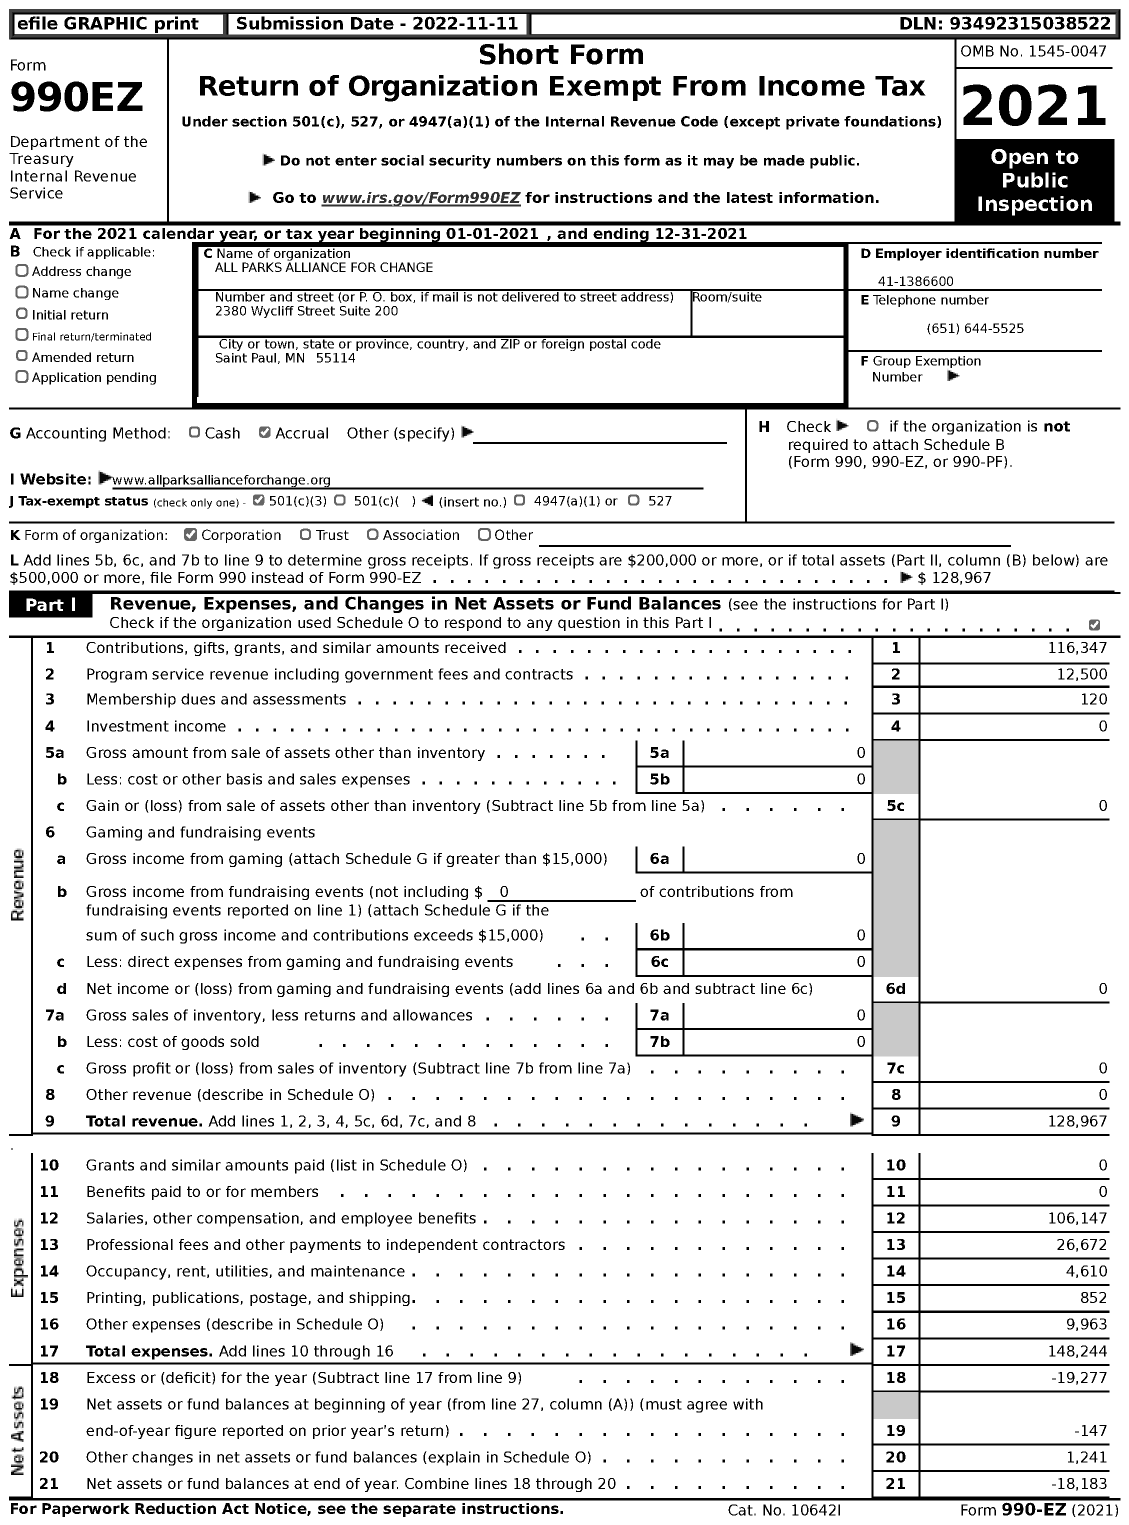 Image of first page of 2021 Form 990EZ for All Parks Alliance for Change